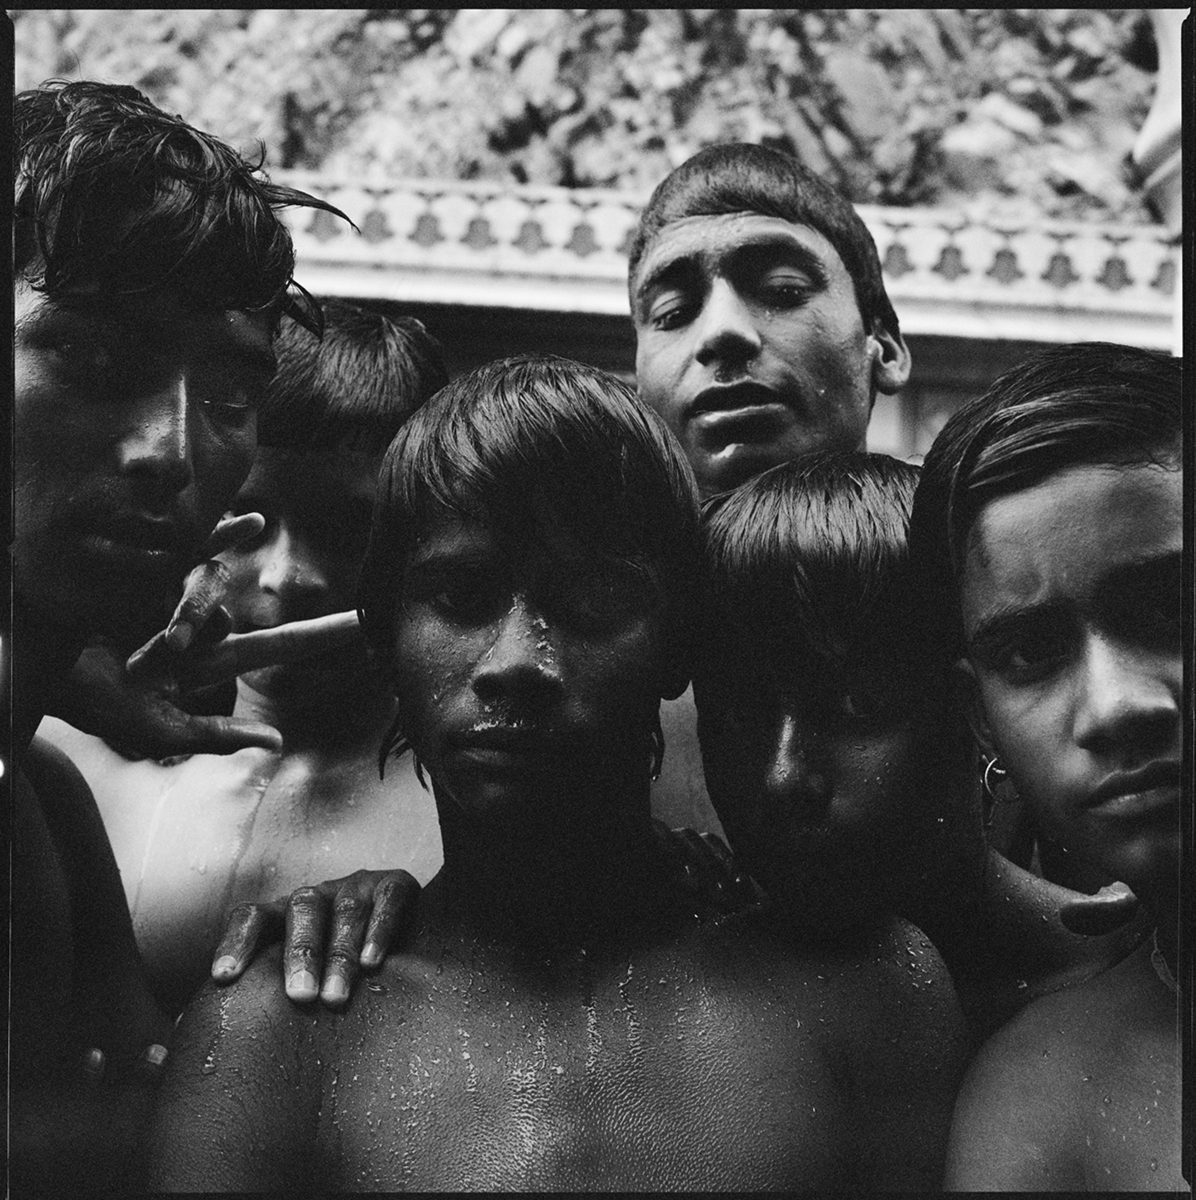 Portrait of a group of boys, high contrast